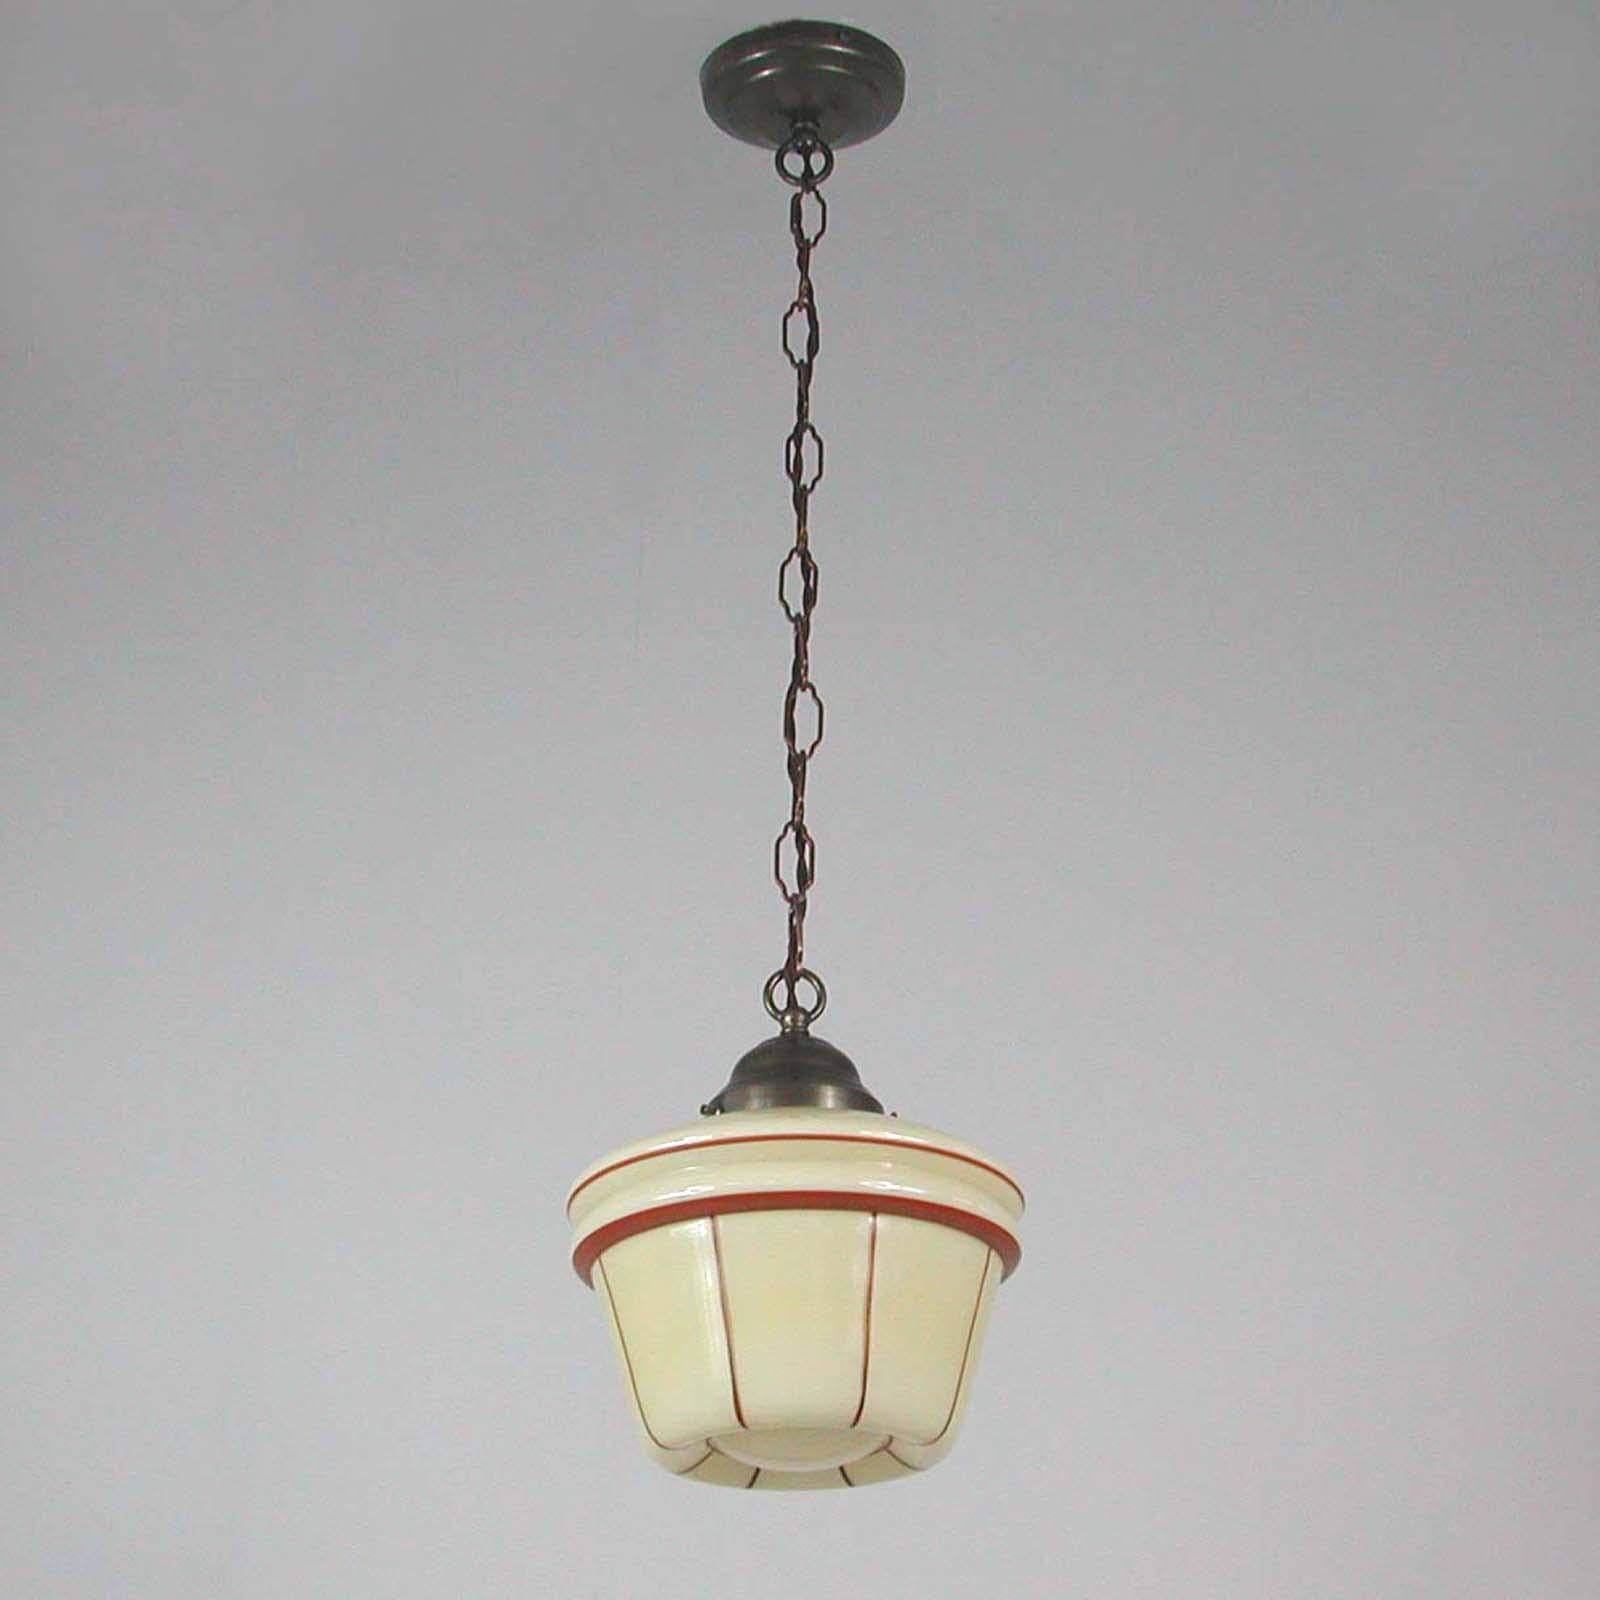 This beautiful Art Deco lantern was designed and manufactured in Germany in the 1920s-1930s. It features a cream colored Opaline lamp shade and patinated brass shade holder, chain and canopy. The lamp shade has got a light brown / dark red enameled